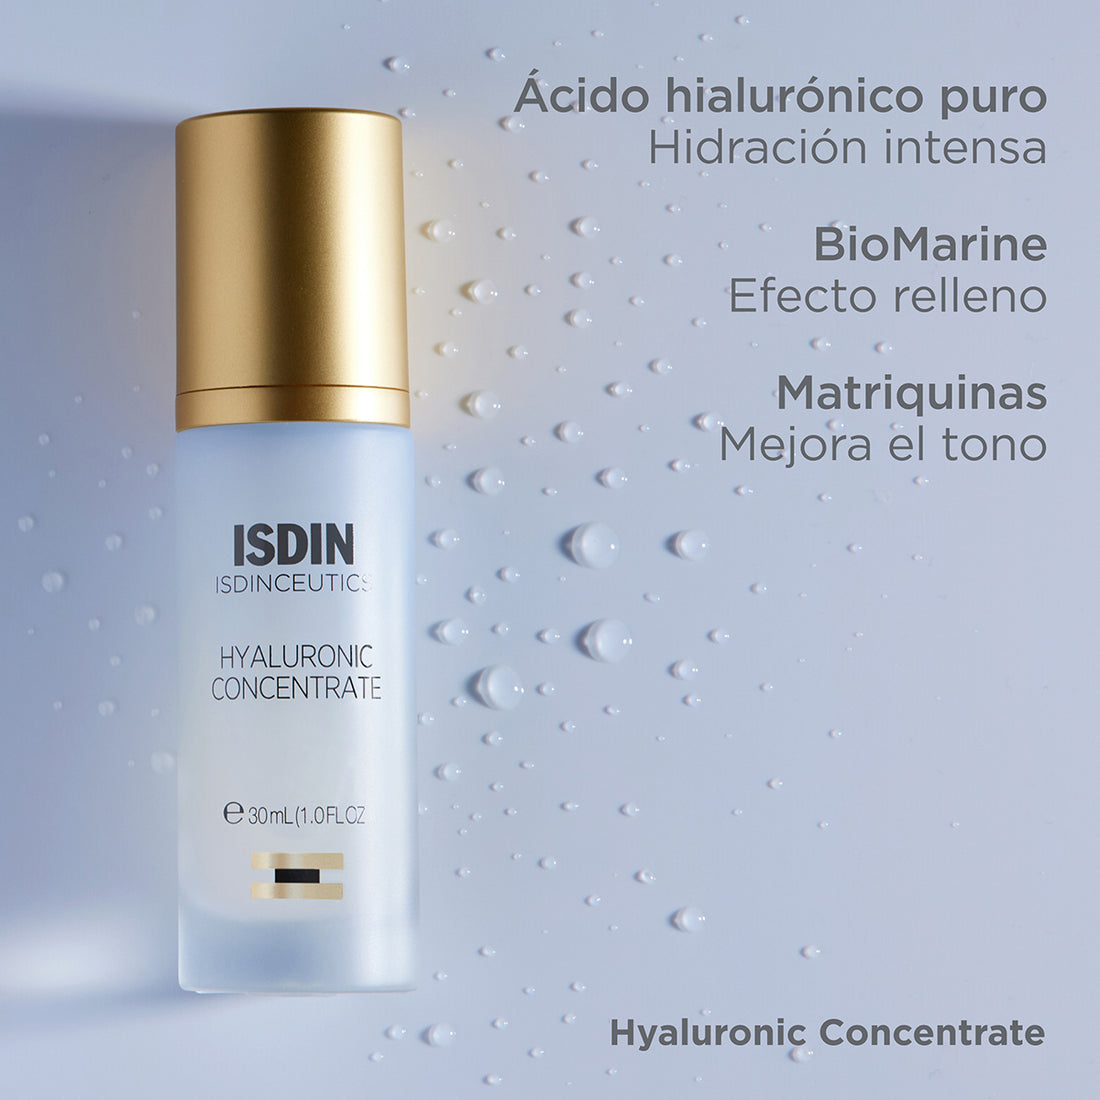 ISDIN Isdinceutics Hyaluronic Concentrate (30ml)